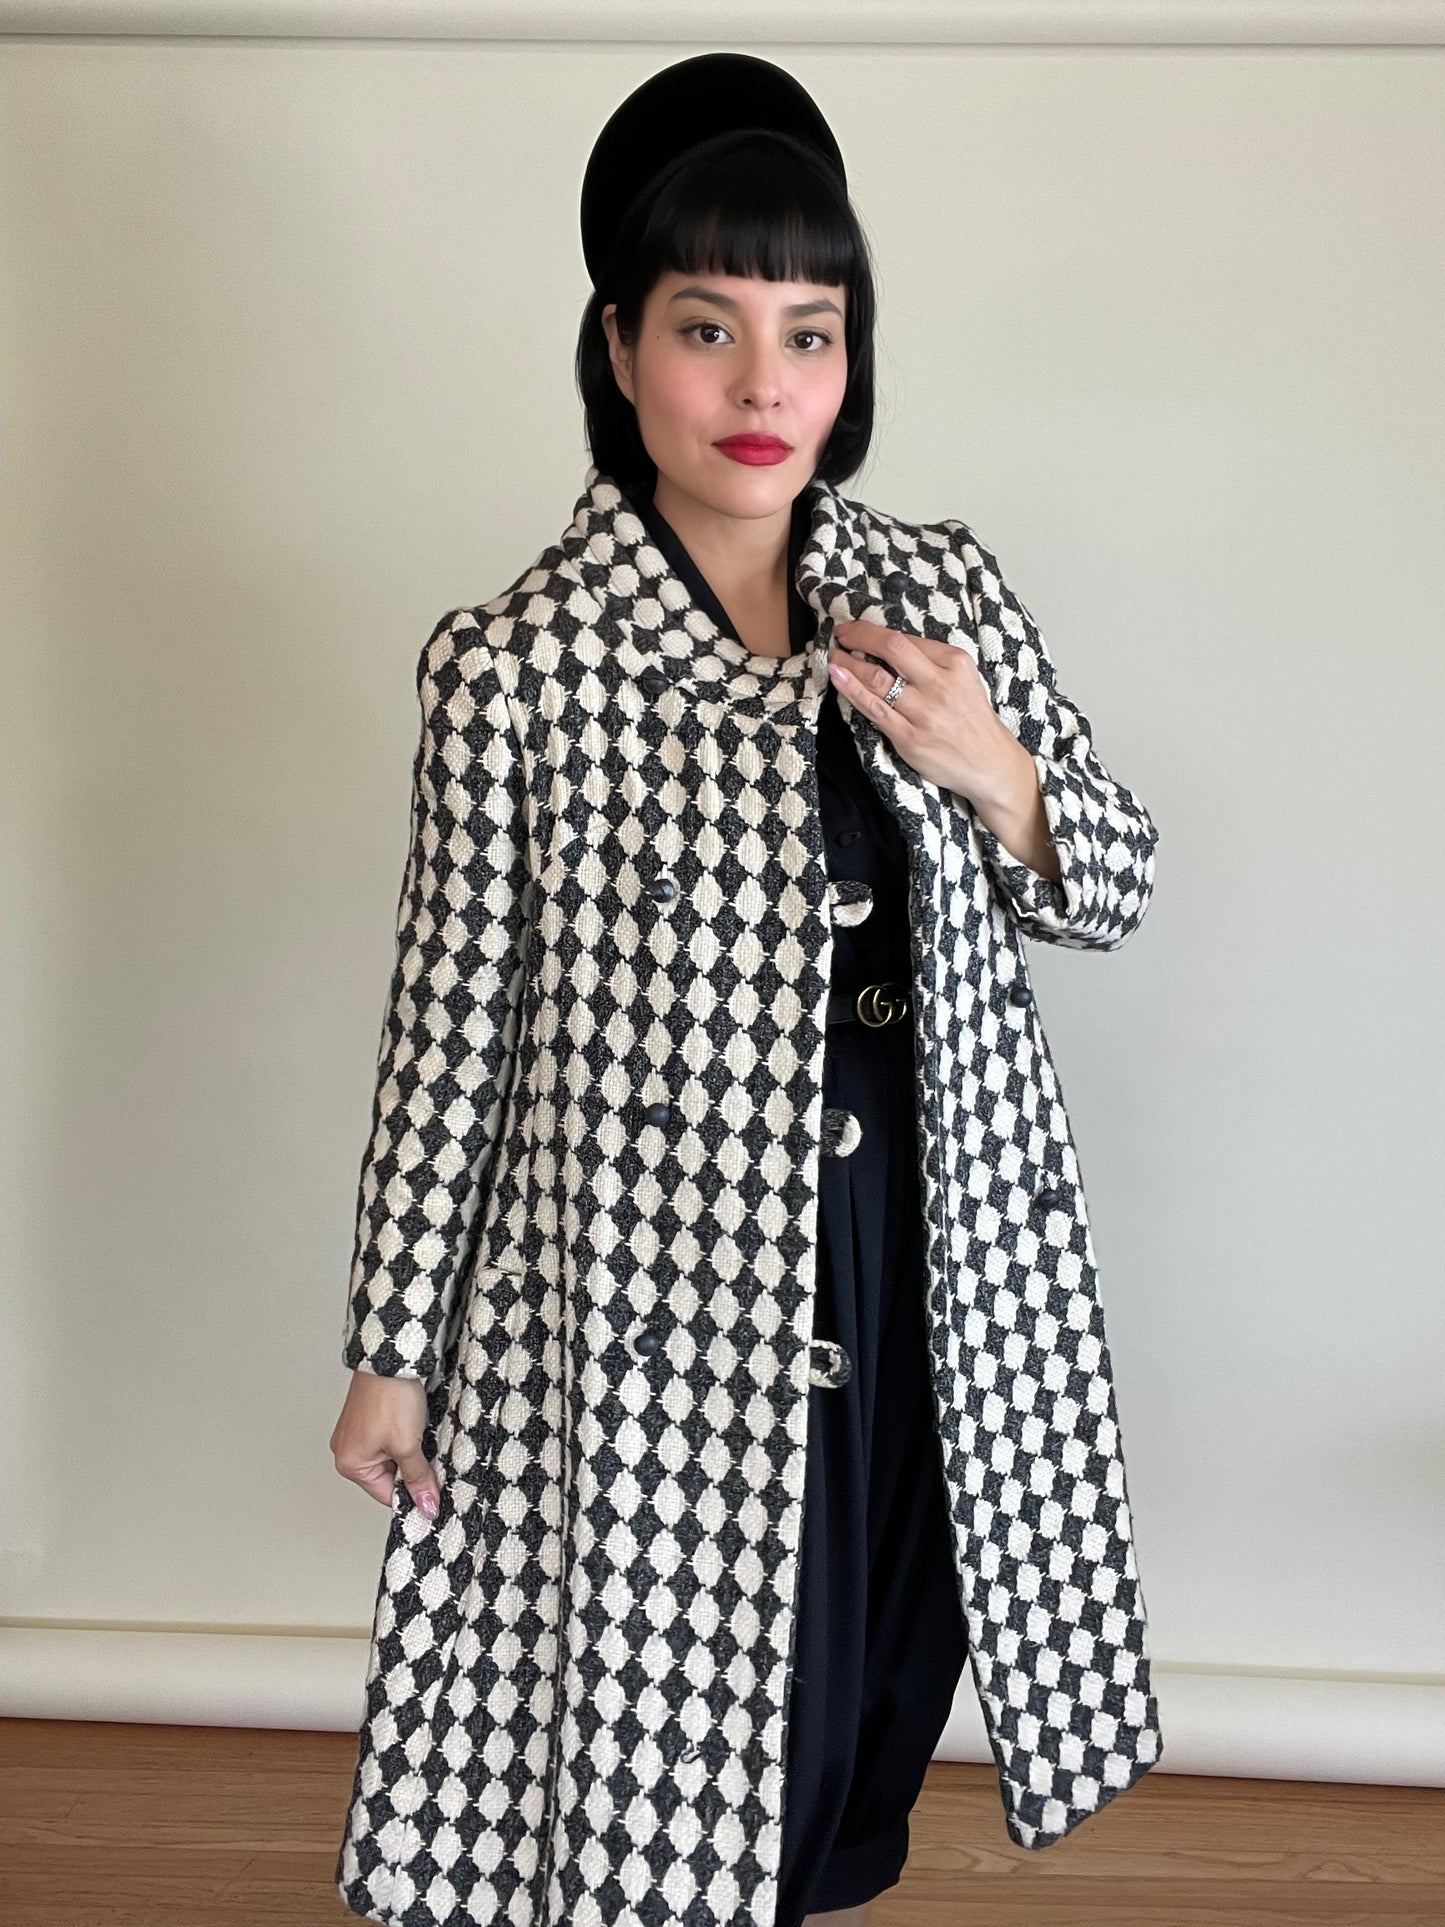 Vintage 60s Mod Checkered Print Wool Coat Best Fits Sizes XS-M